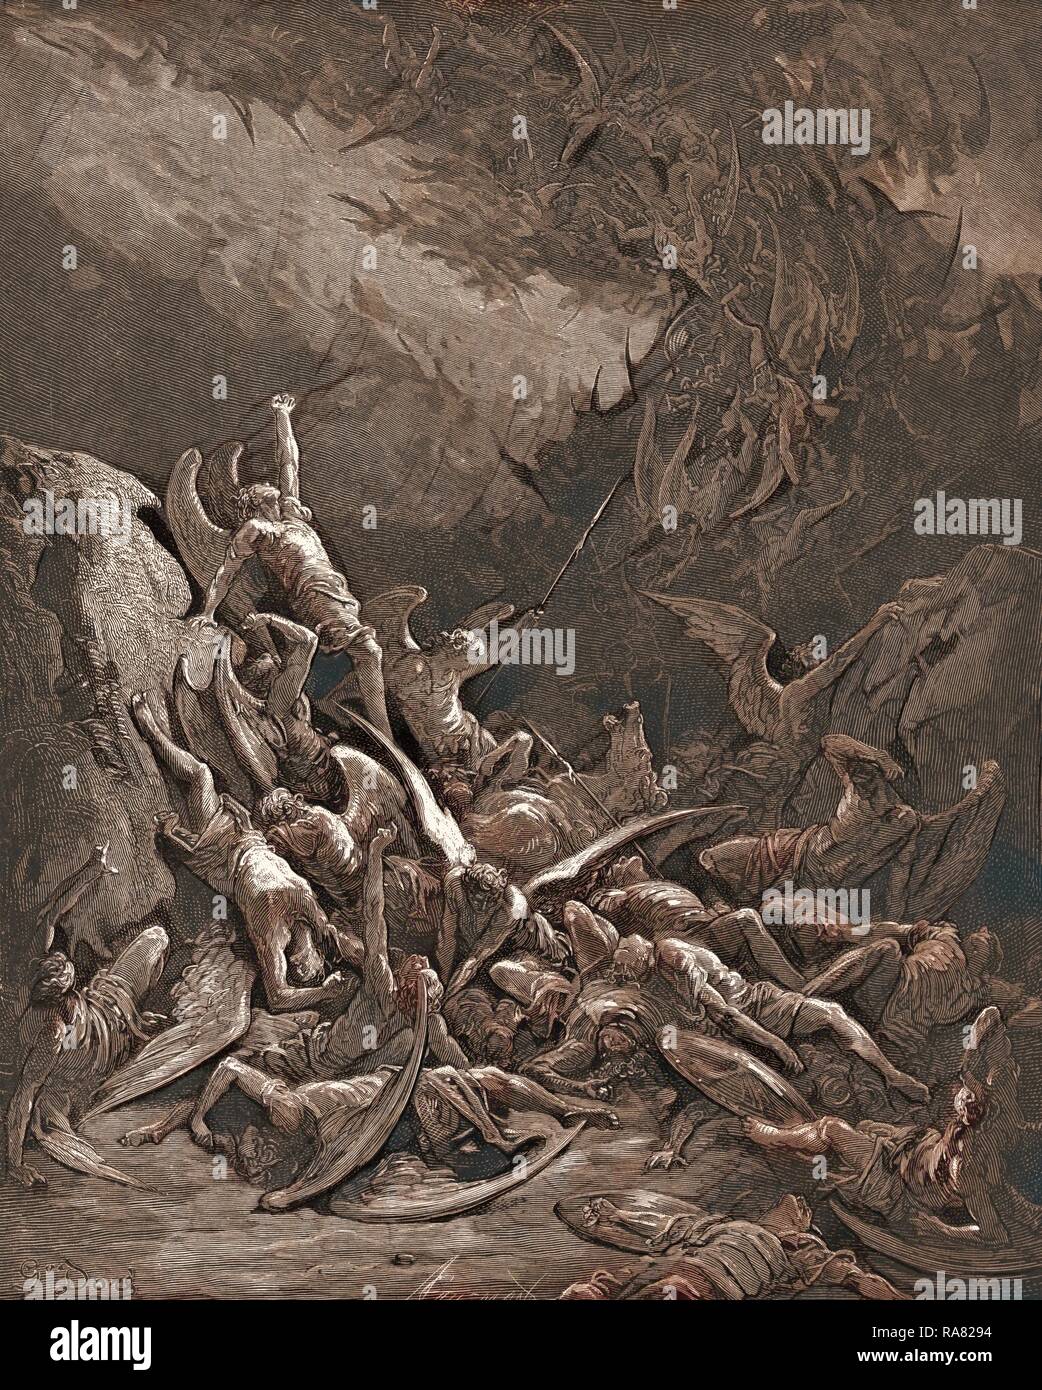 The Fall of the Rebel Angels, by Gustave Dore, 1832 - 1883, French. Engraving for Paradise Lost by Milton. 1870, Art reimagined Stock Photo